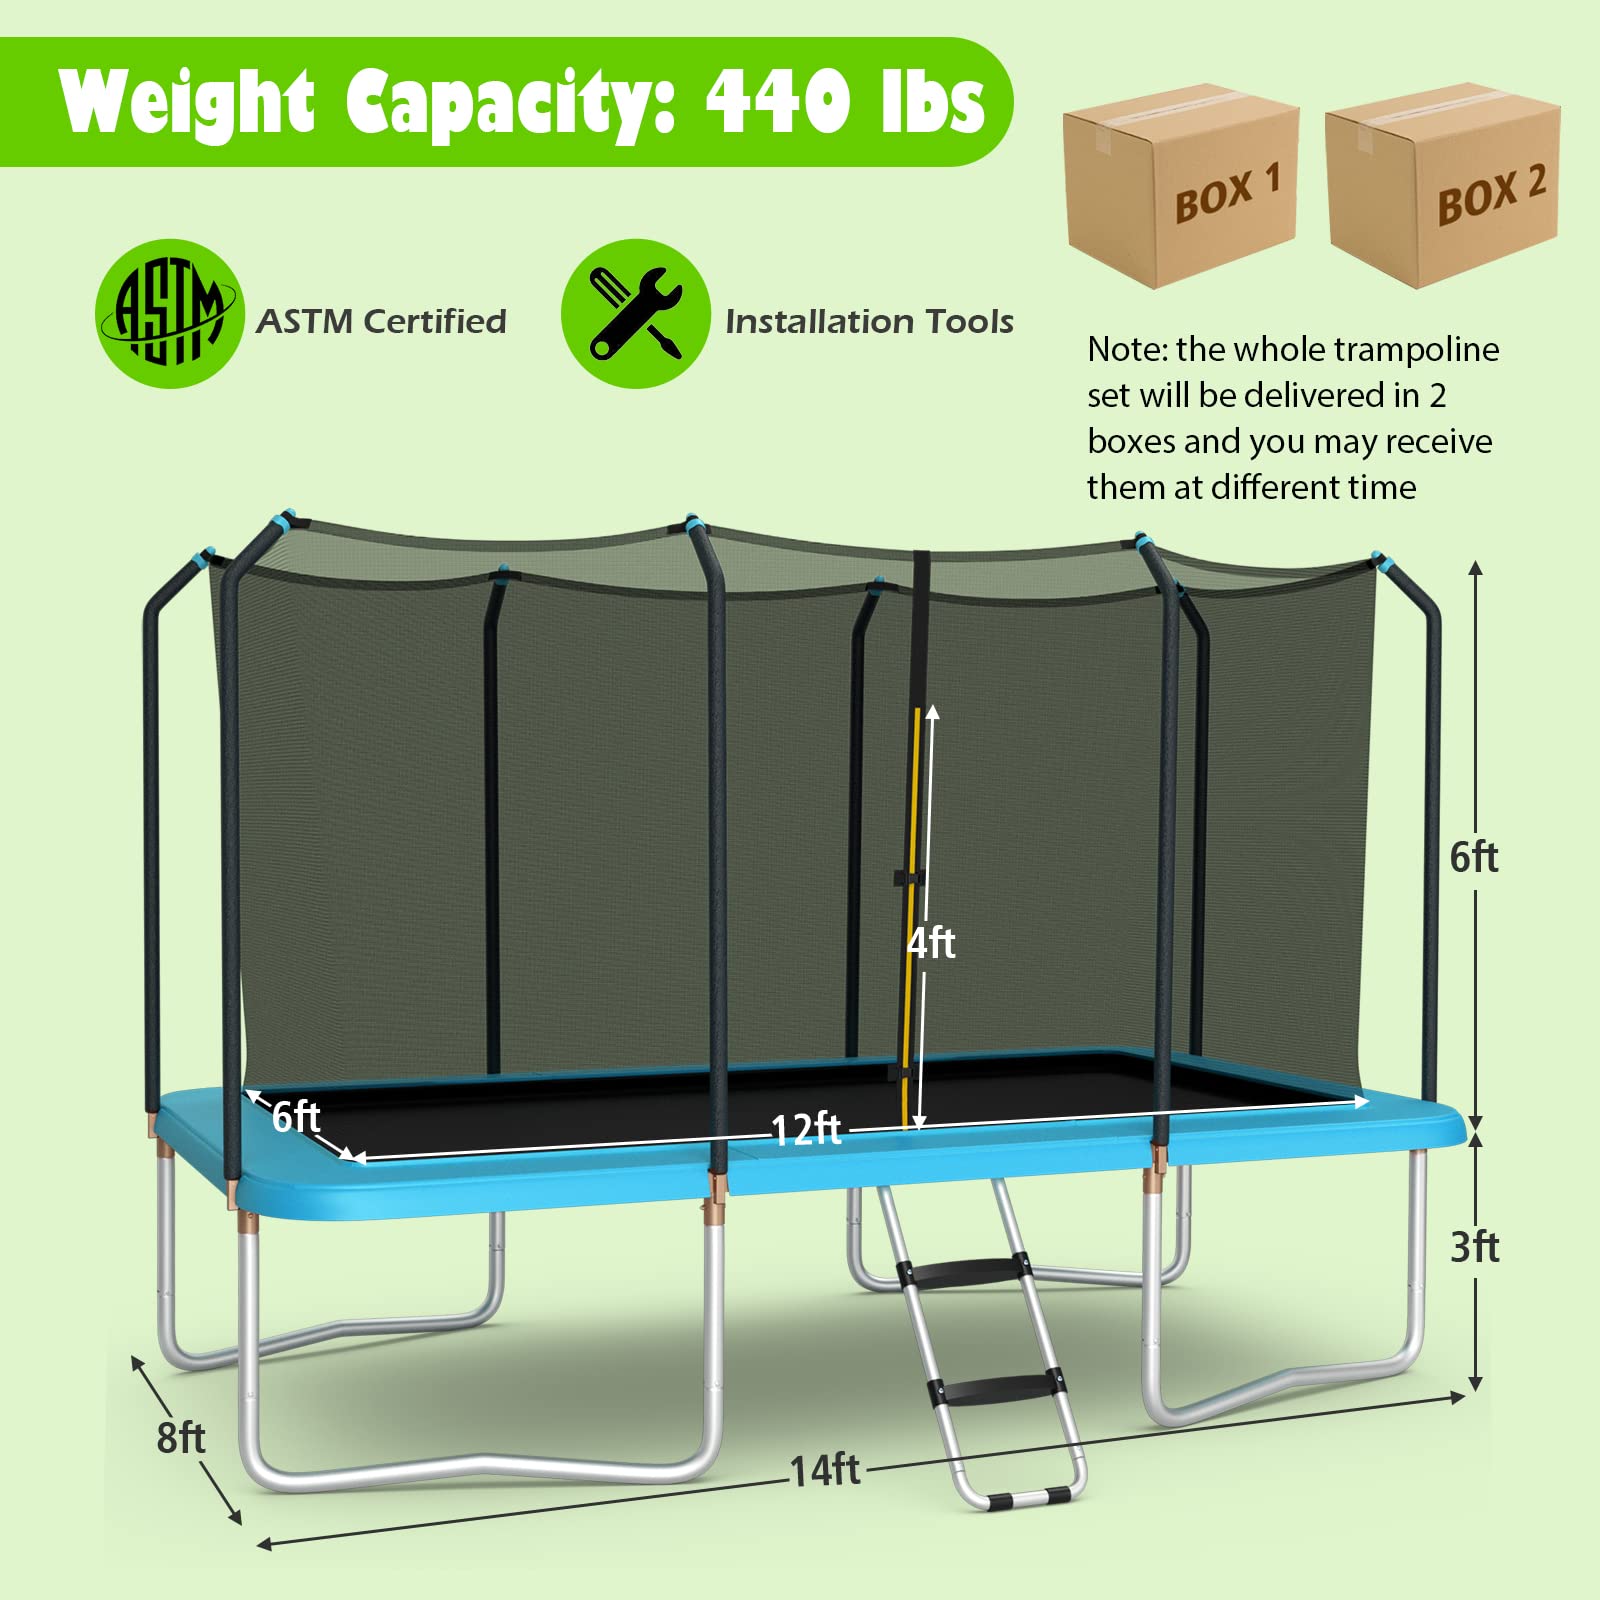 Giantex Trampoline, 8 FT x 14 FT ASTM Certified Rectangular Trampoline with Enclosure, Ladder, Double-Side Galvanized Steel Frame